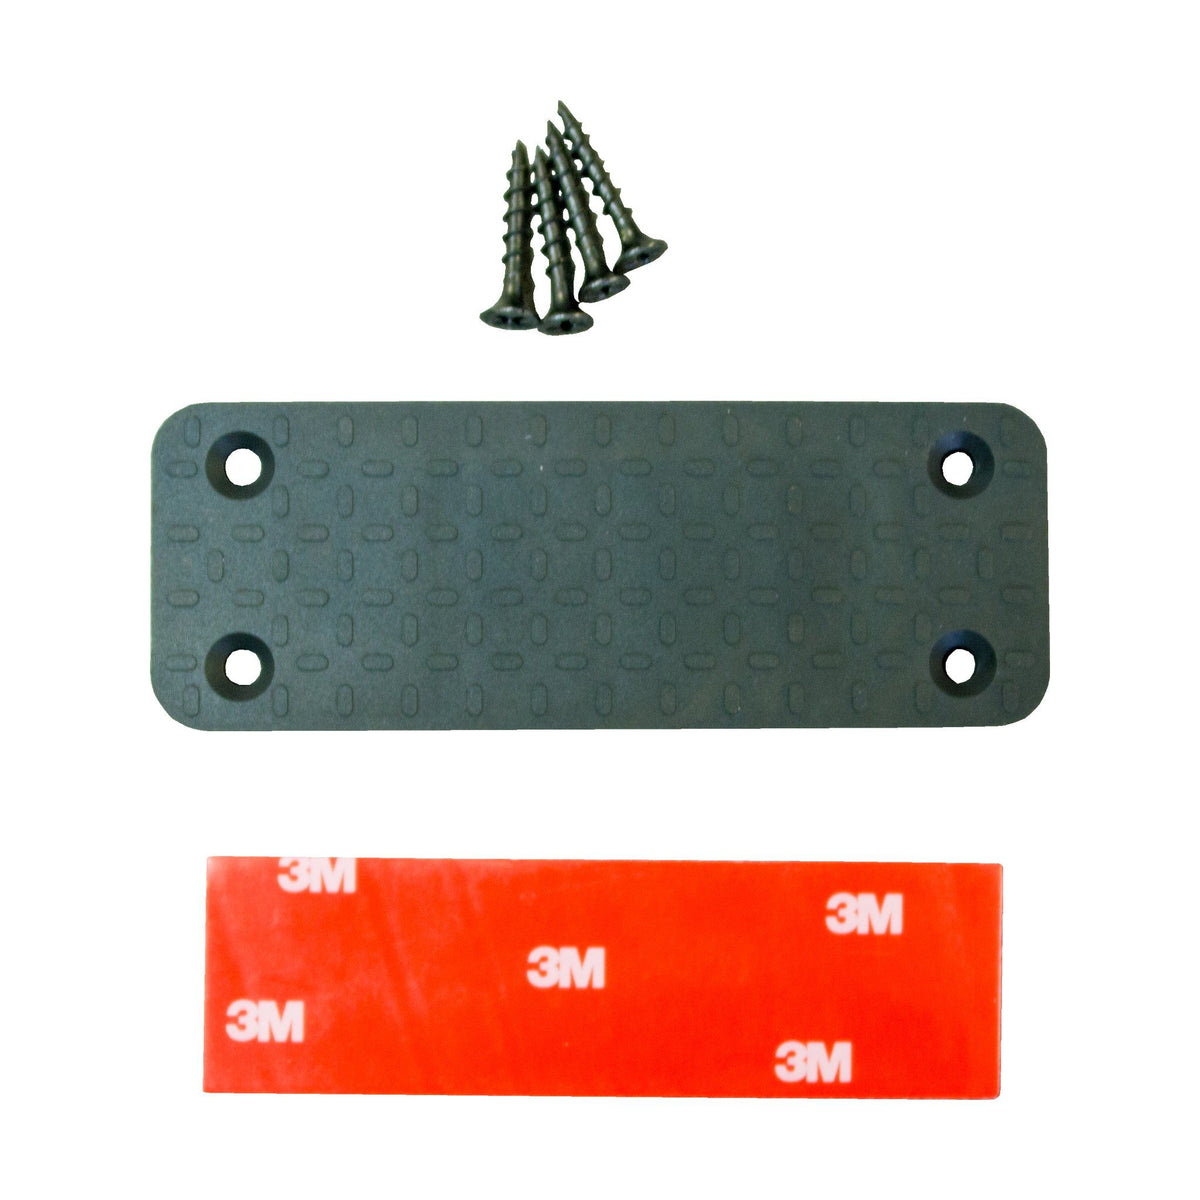 Accessories - Tracker MAG-45 Gun Magnet - Holds 45 Pounds